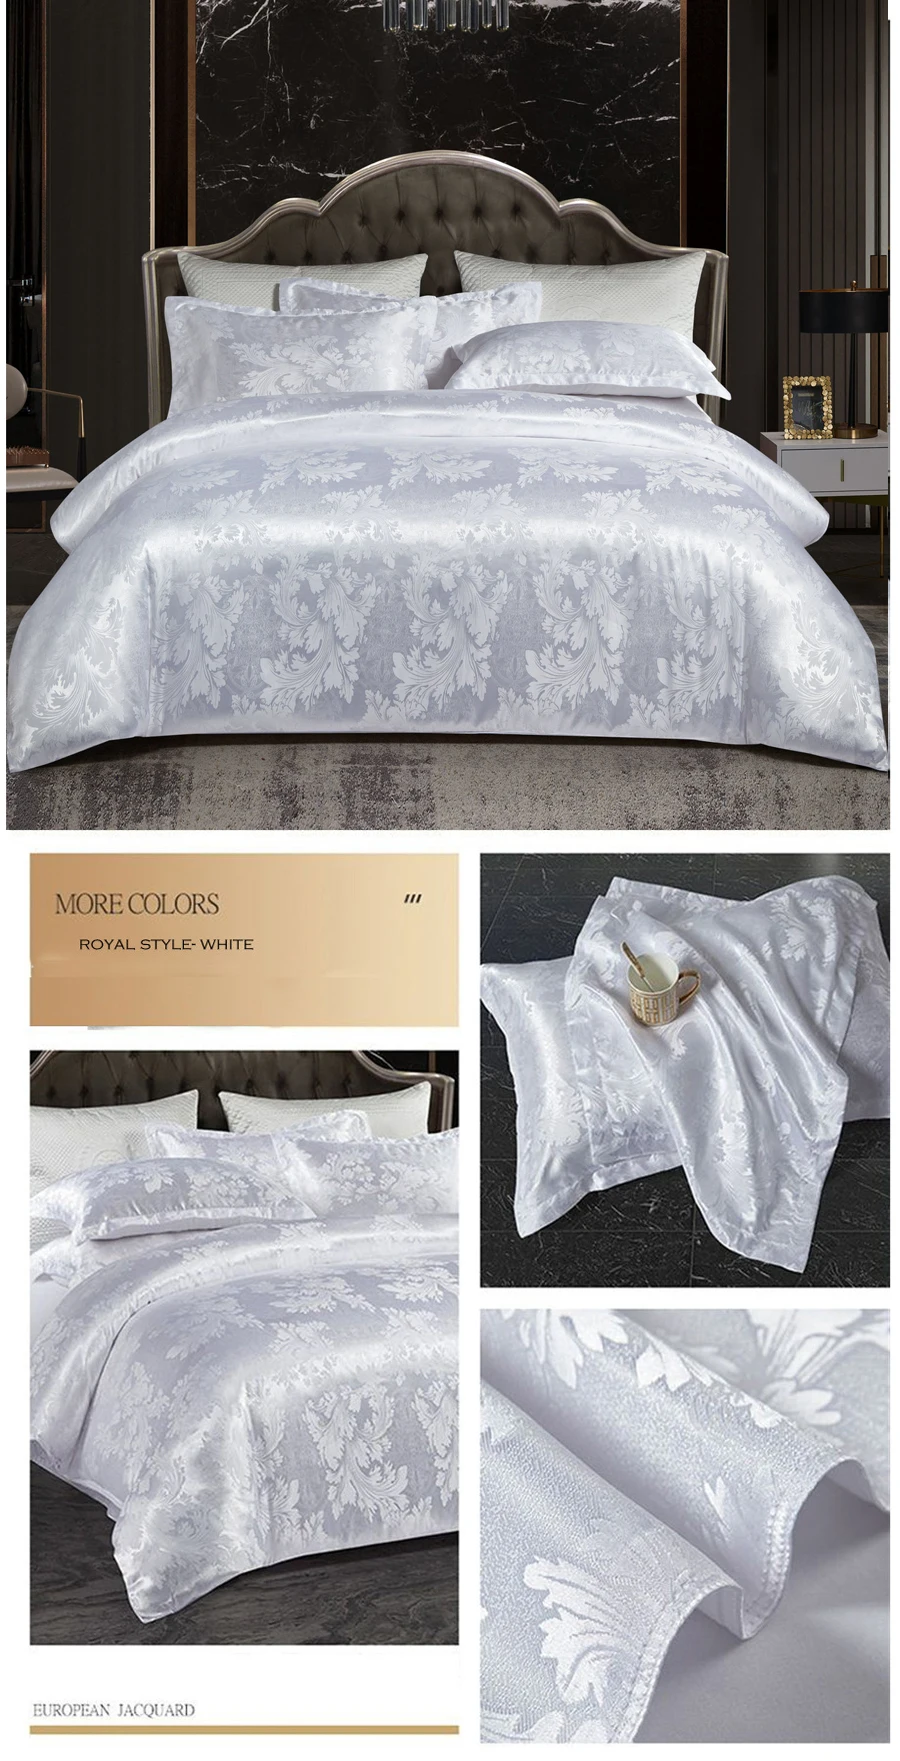 European Luxury Satin Rayon Jacquard Duvet Cover 220x240 2 People Double Bed Quilt Cover Bedding Set Queen King Size Comforter